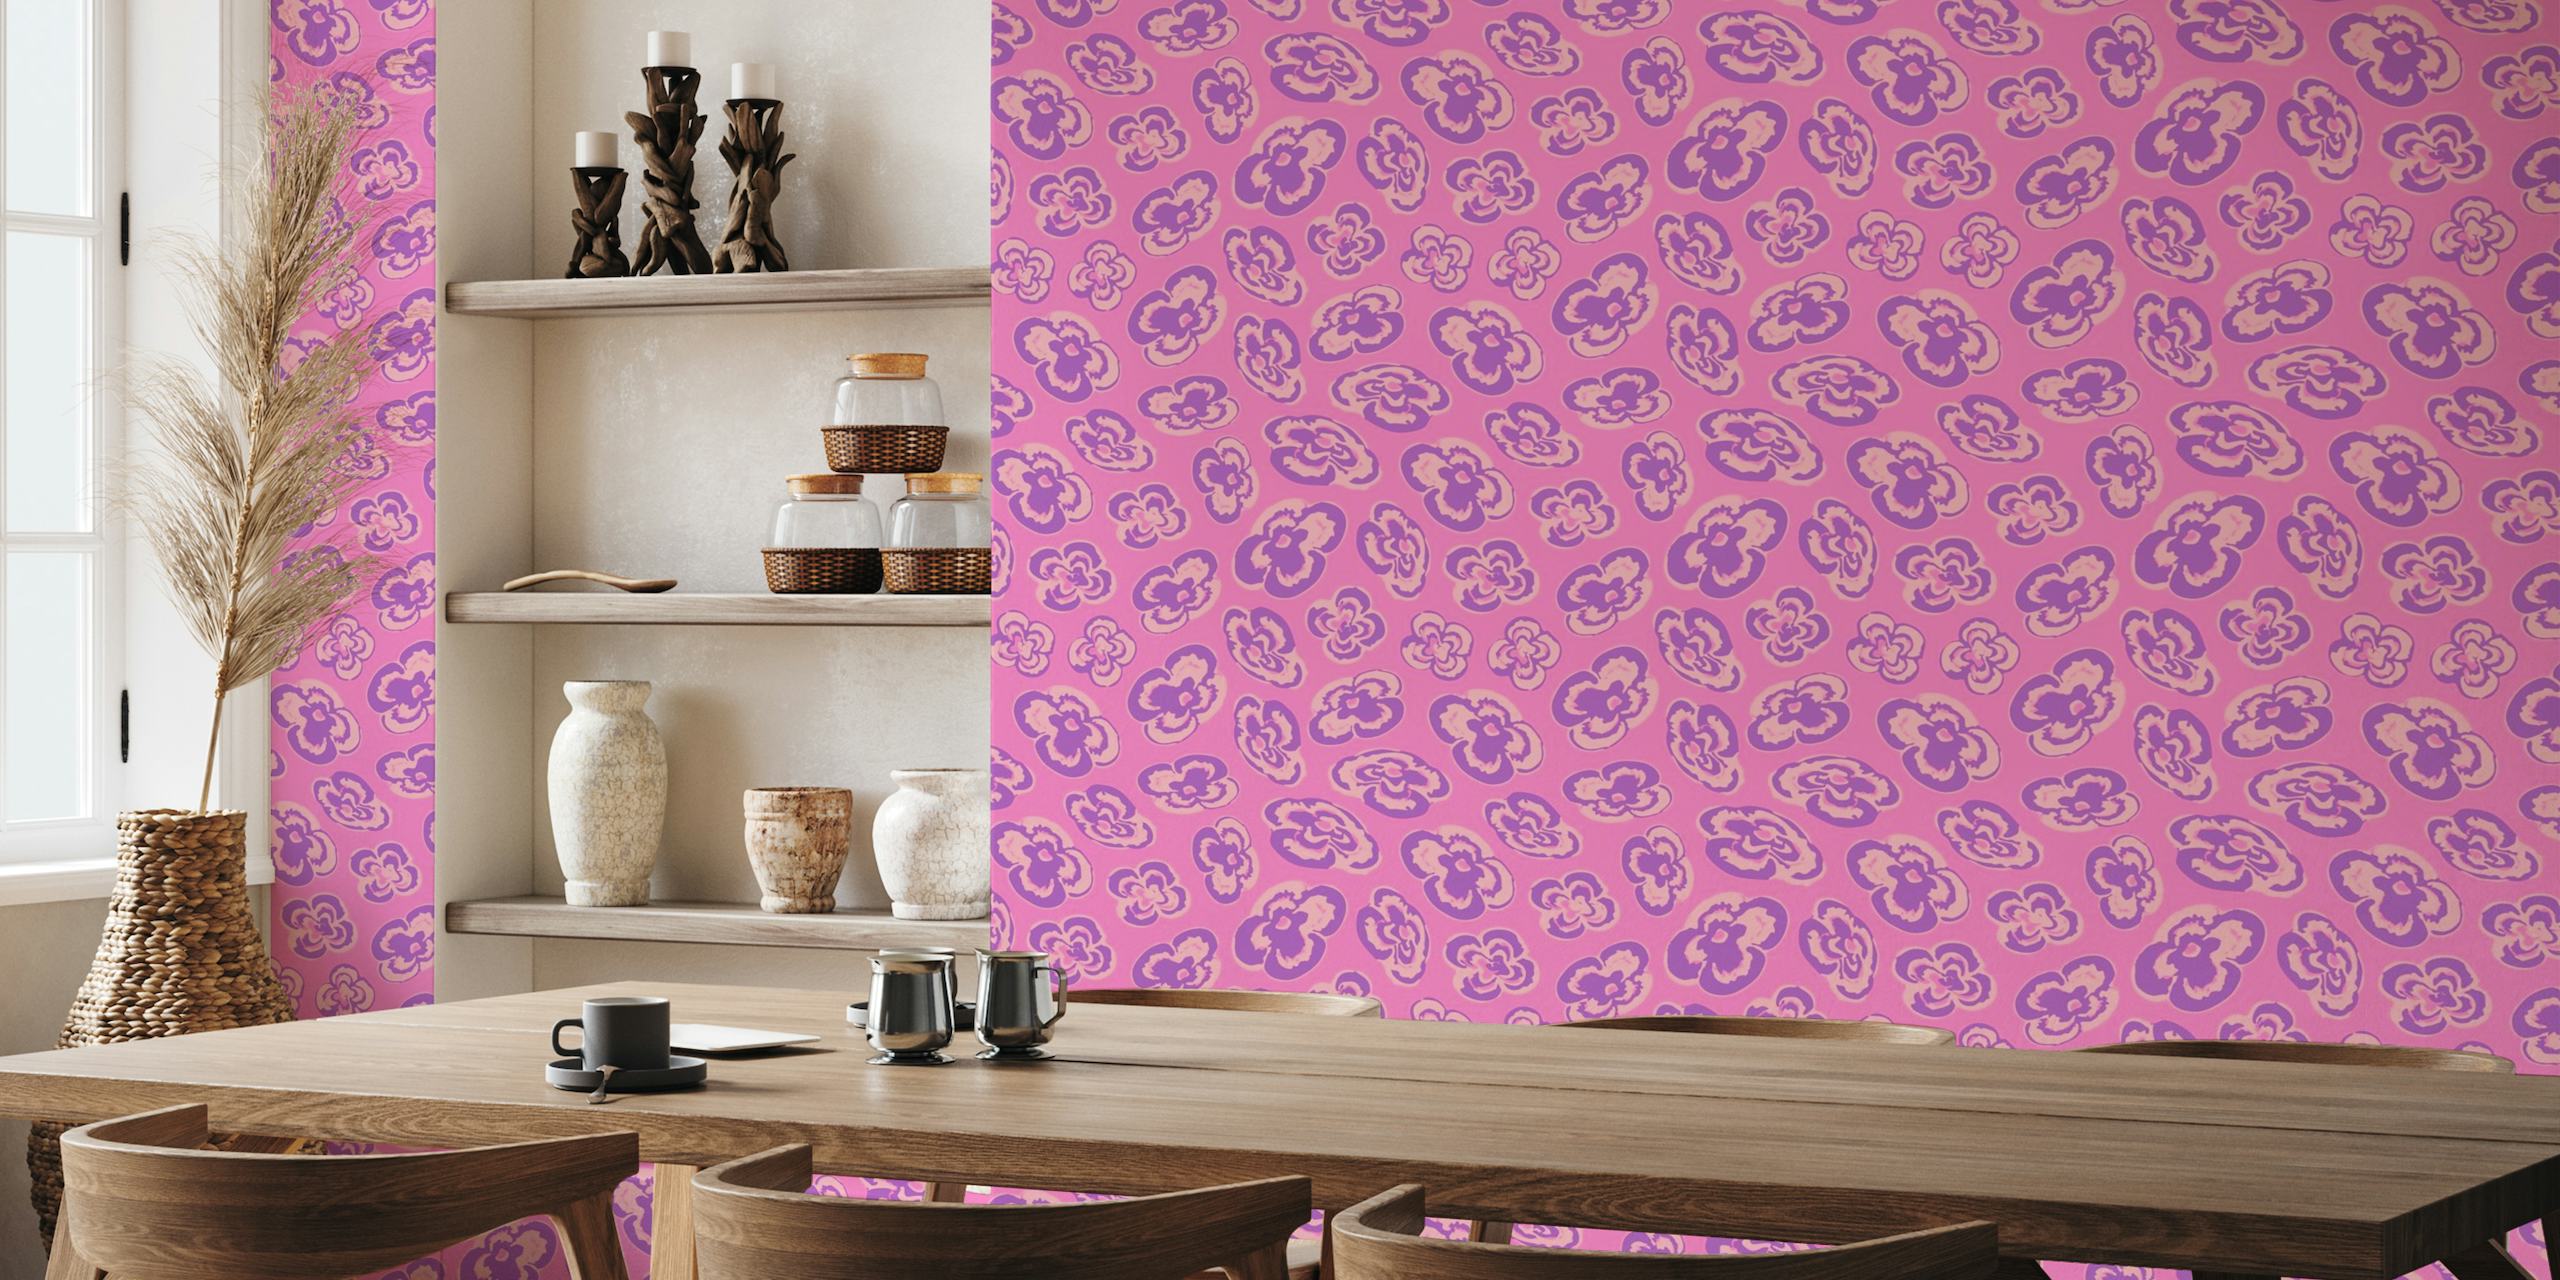 Abstract floral wall mural with purple and pink lilies floating on a pink background